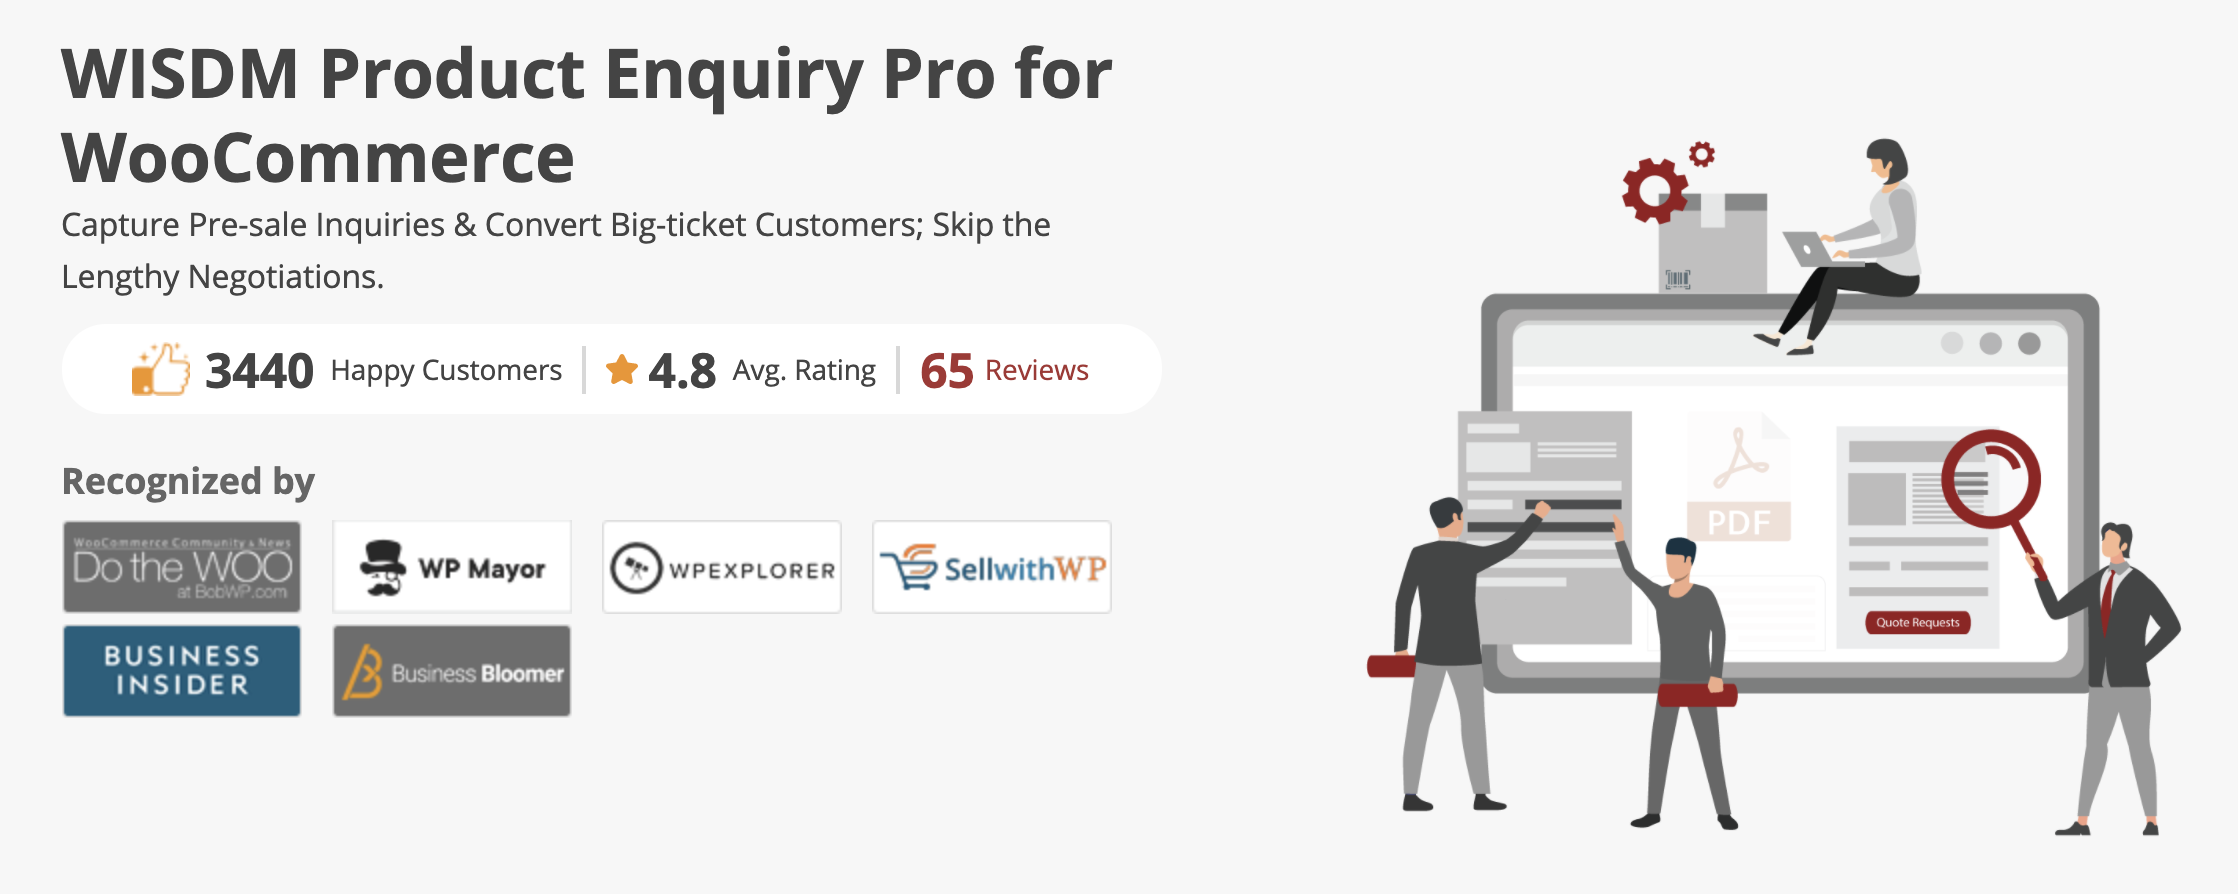 WISDM Product Enquiry Pro for WooCommerce - WordPress Quote Plugin 